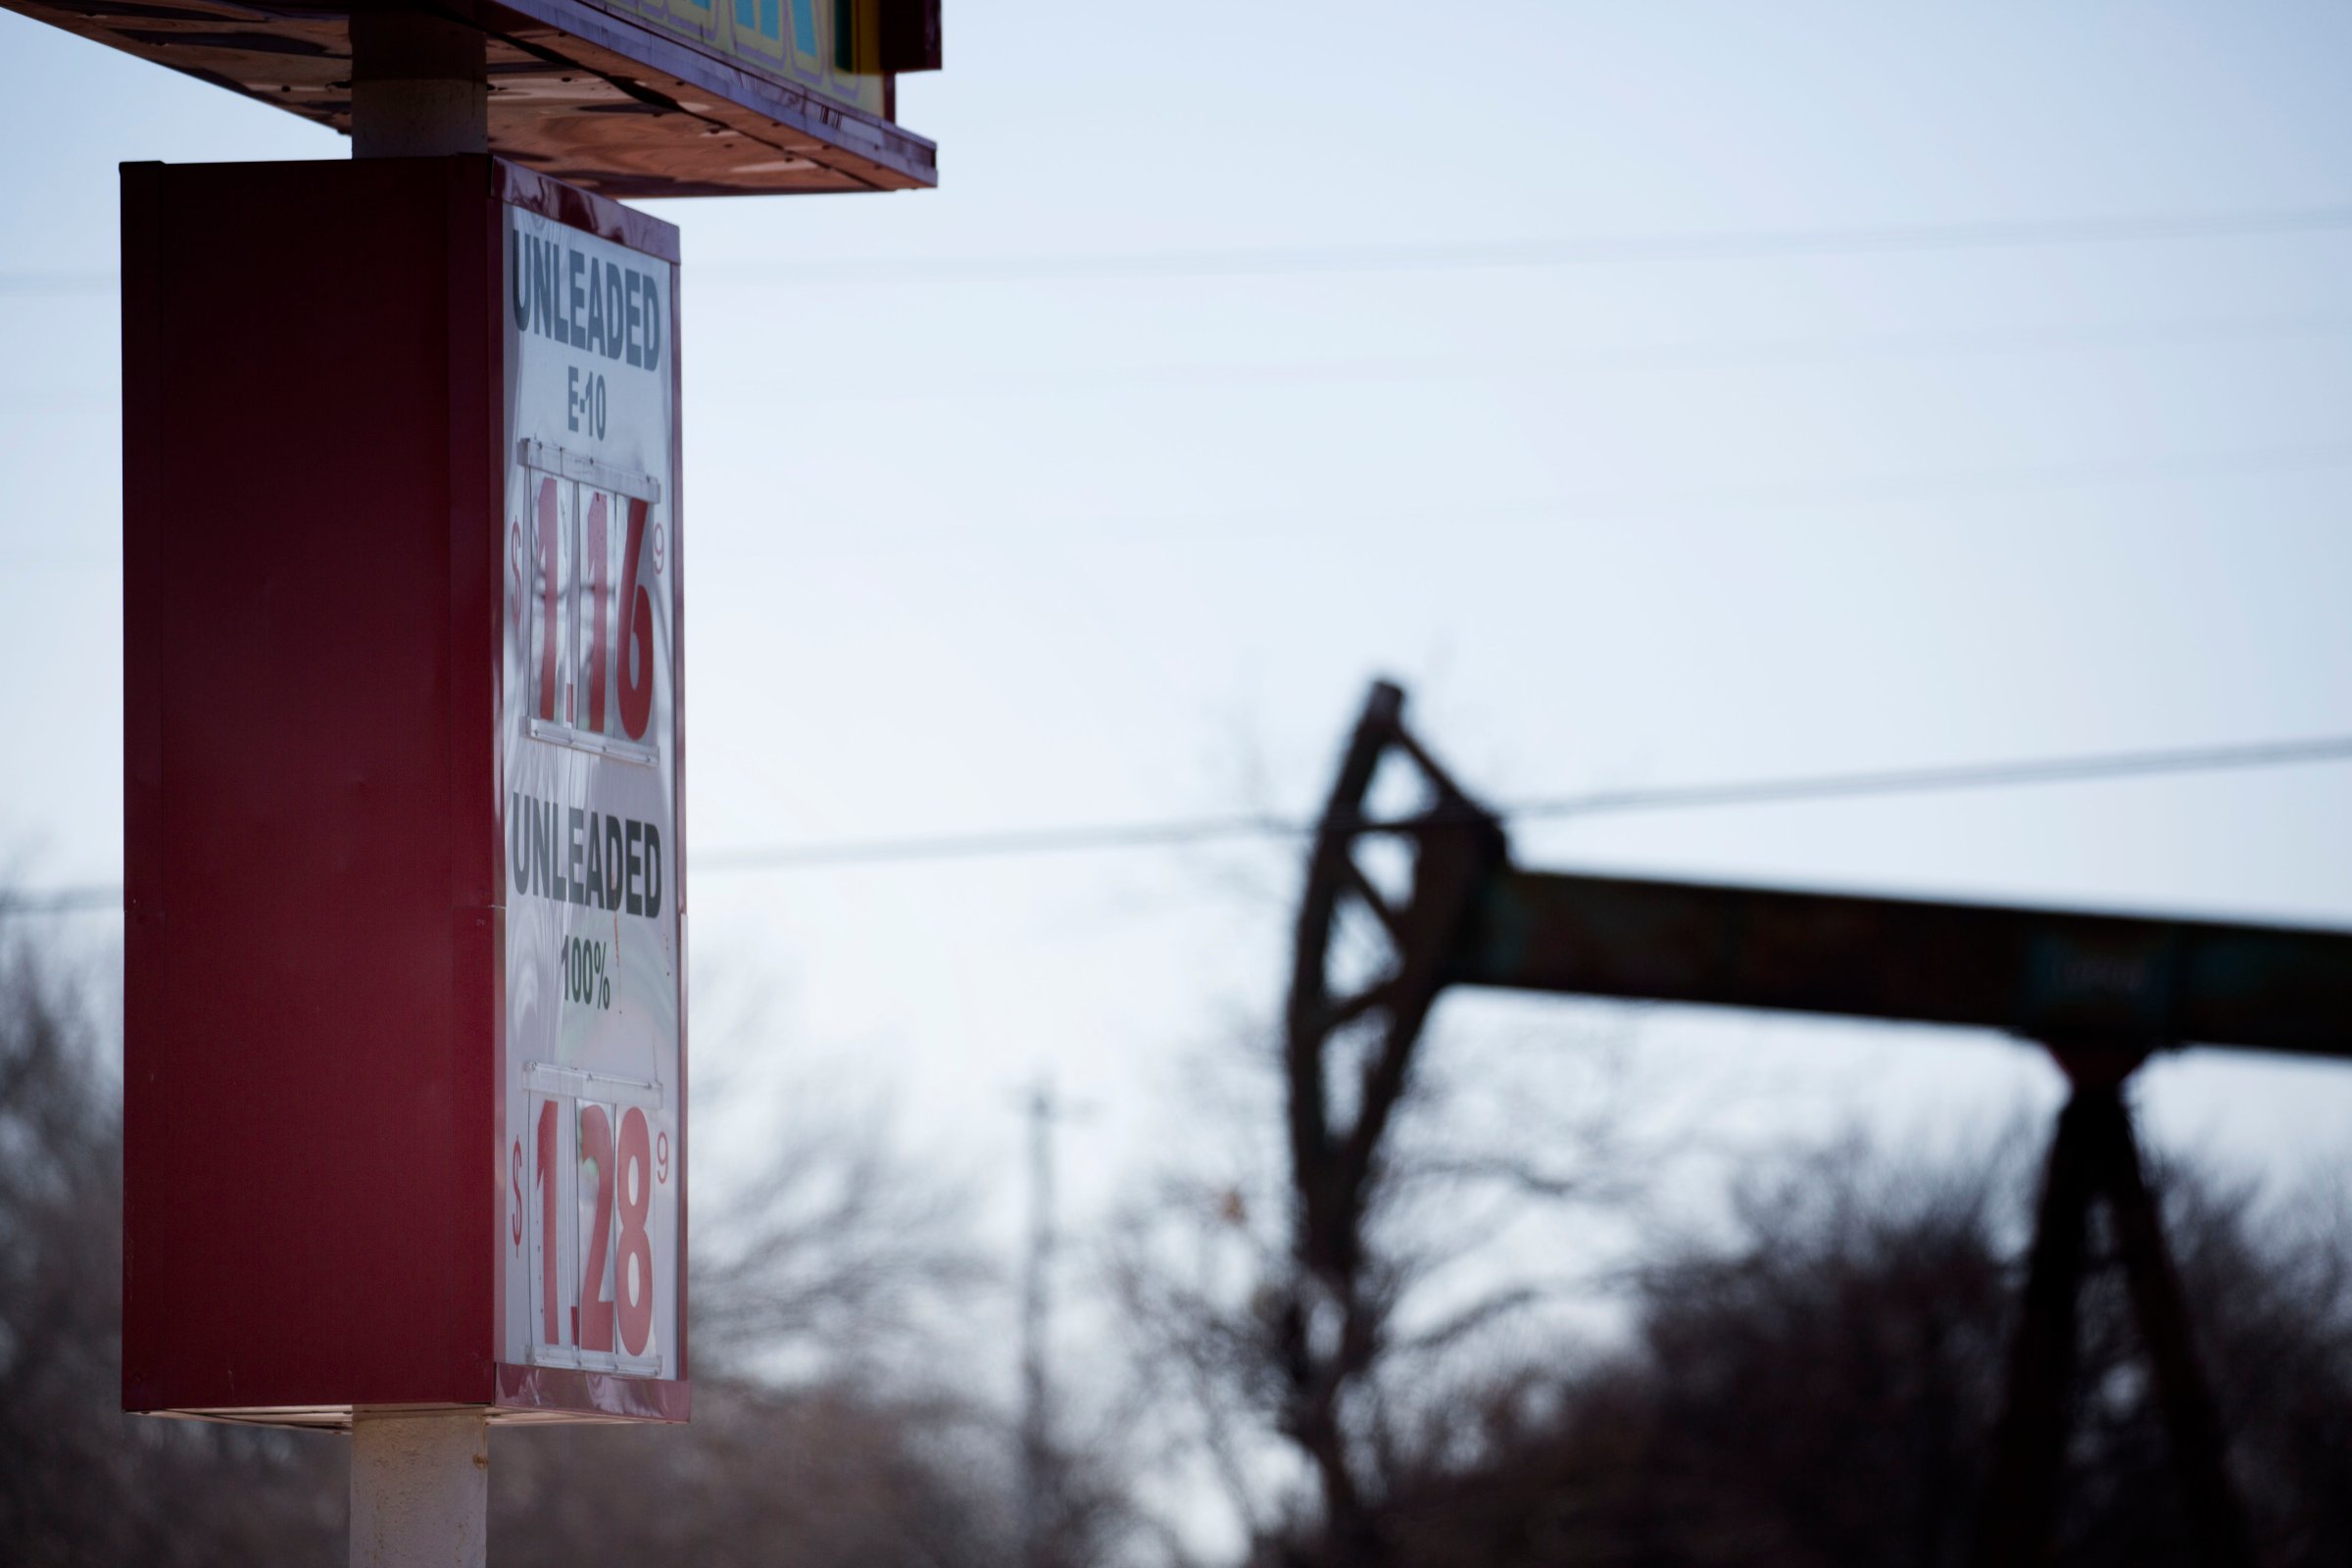 A gas station, near an oil well pumper, was selling gas for $1.16 a gallon February 12, 2016 in Oklahoma City, Oklahoma.